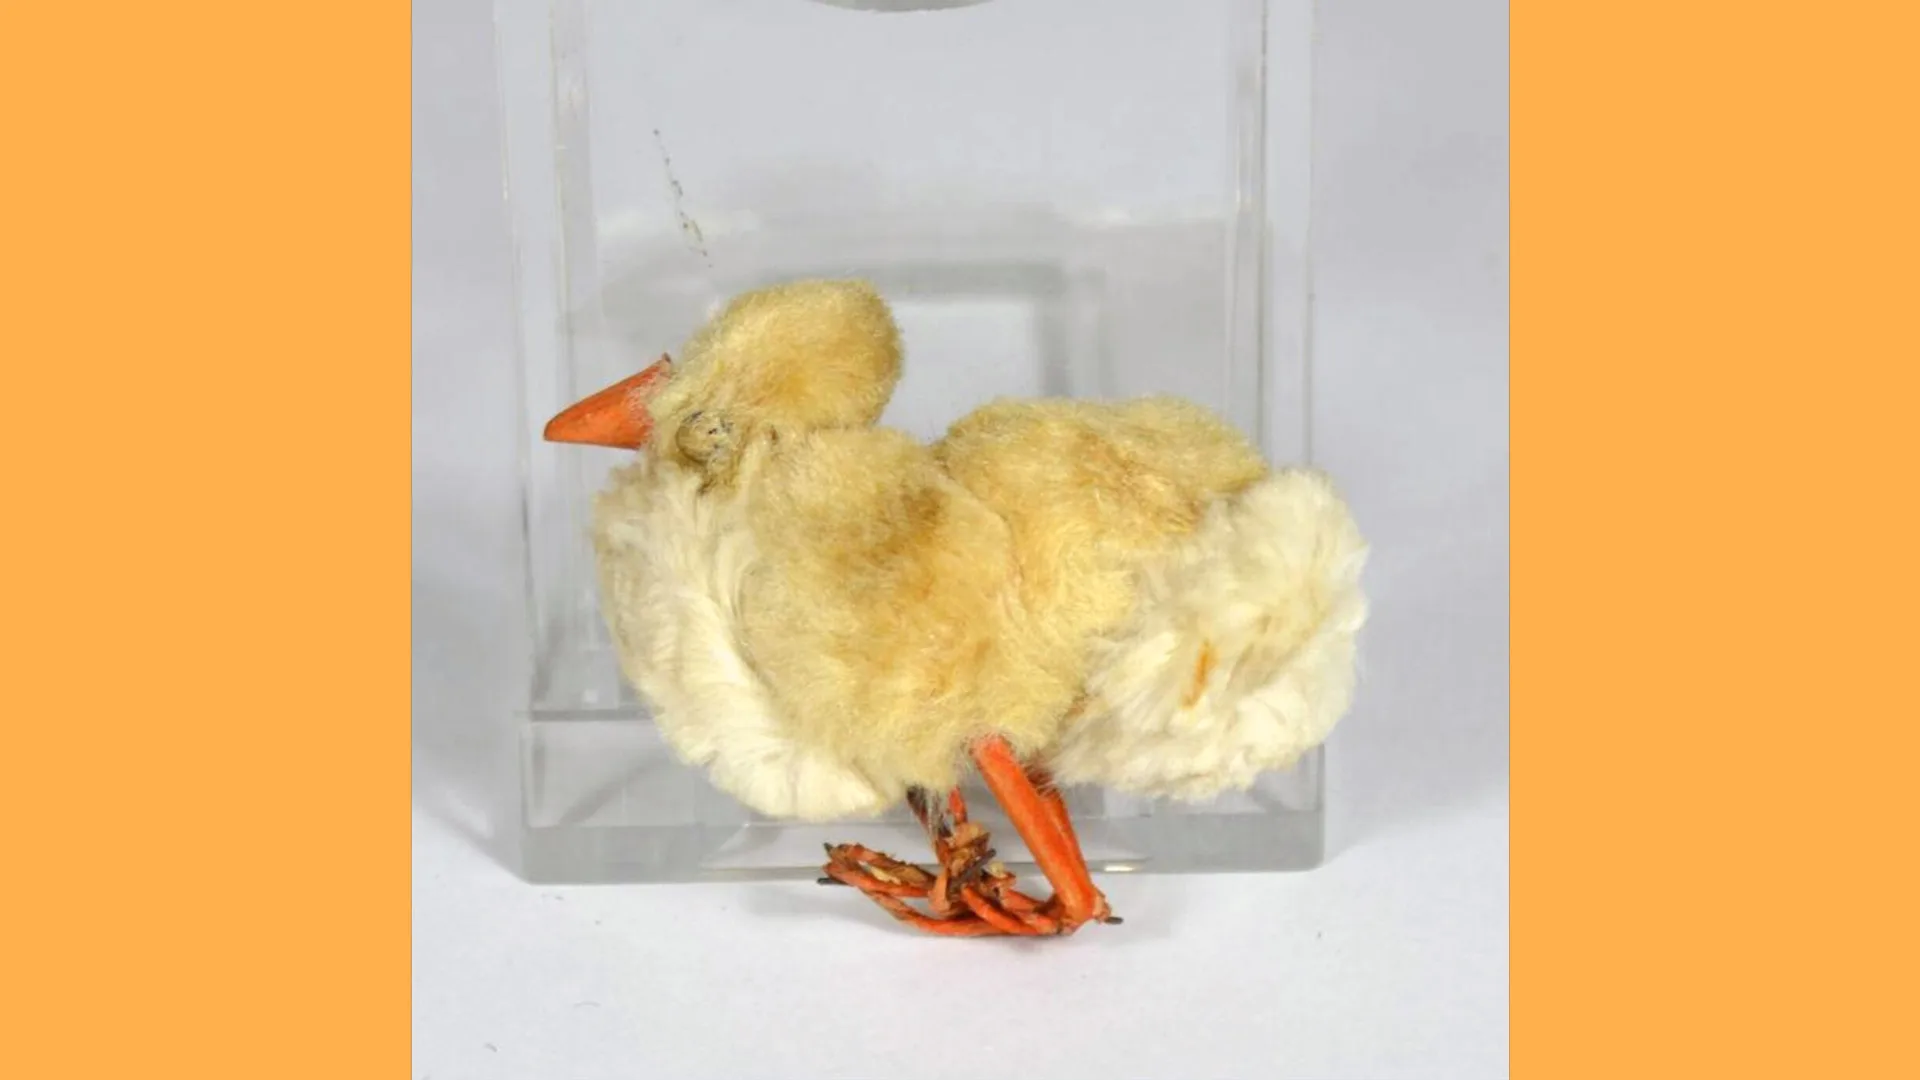 A photograph of a soft toy of a yellow chick with orange beak and feet. It is missing an eye. Against a grey background.